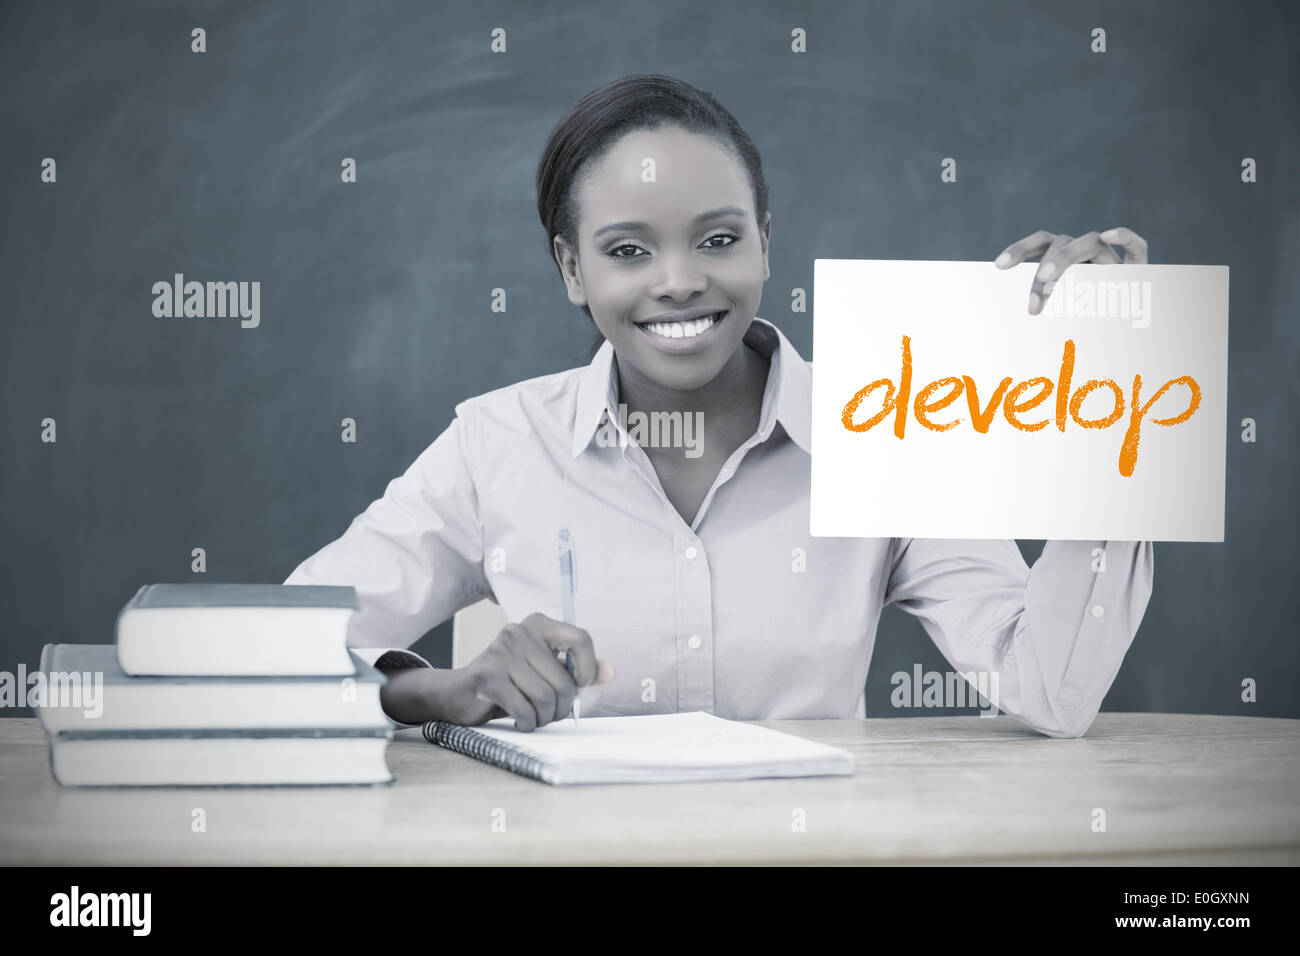 Happy teacher holding page showing develop Stock Photo